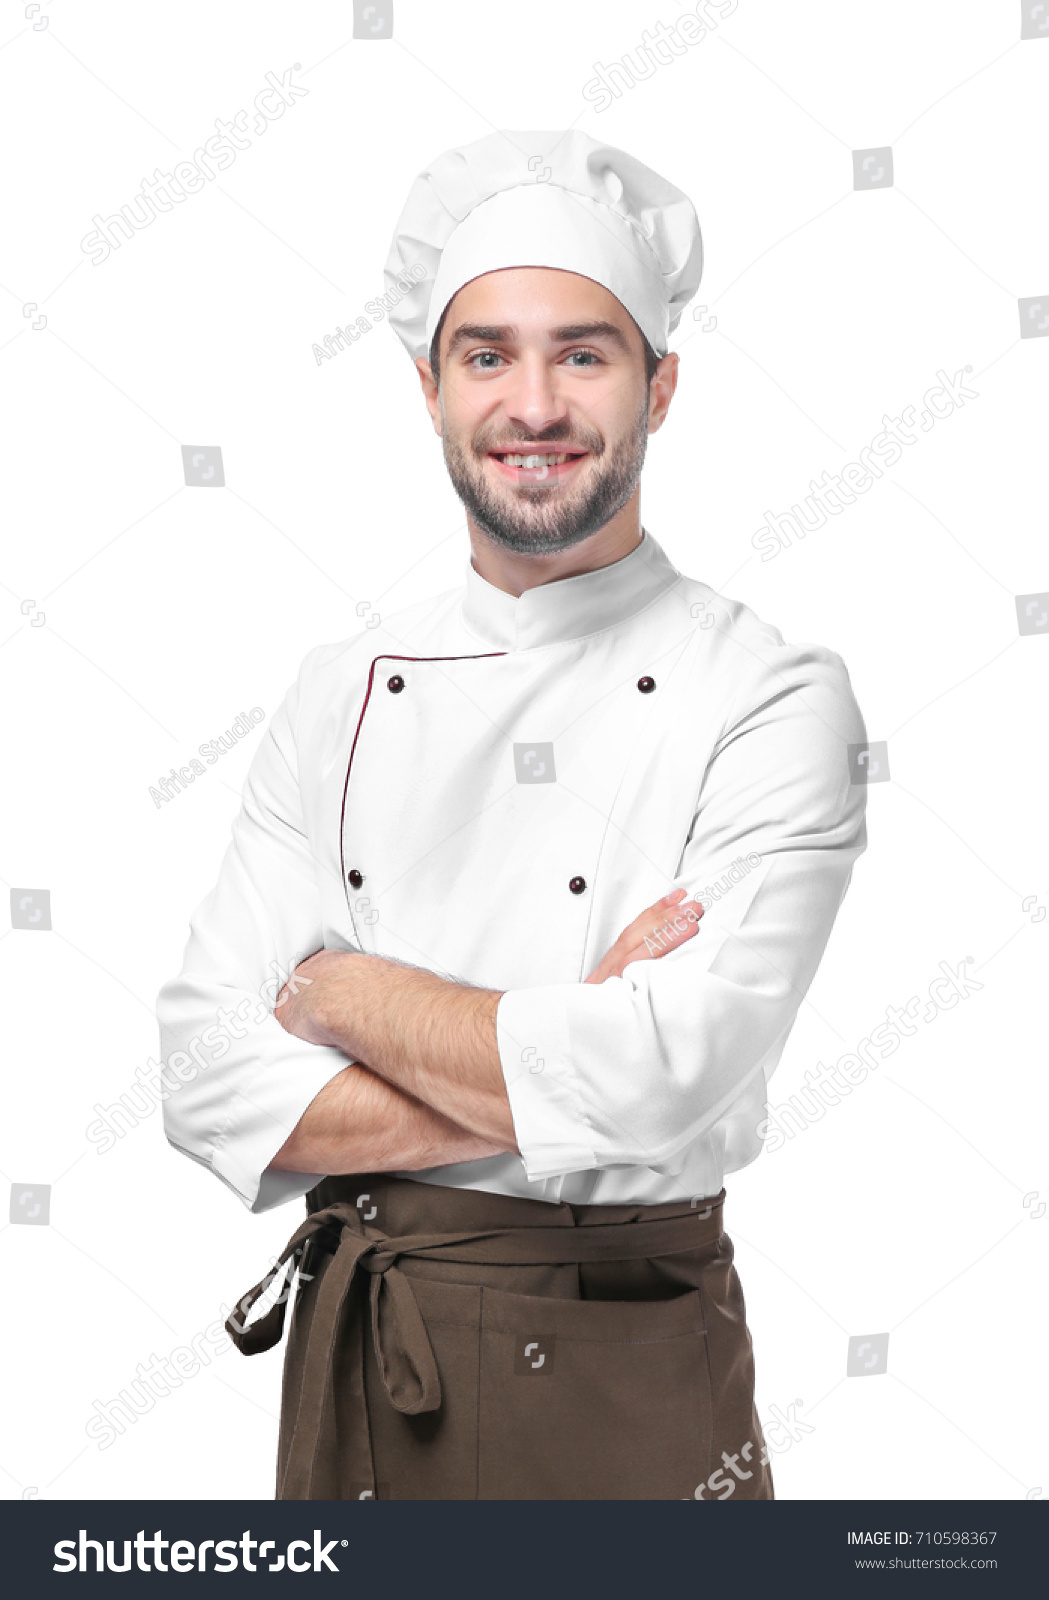 Chefs Whites Images Stock Photos And Vectors Shutterstock